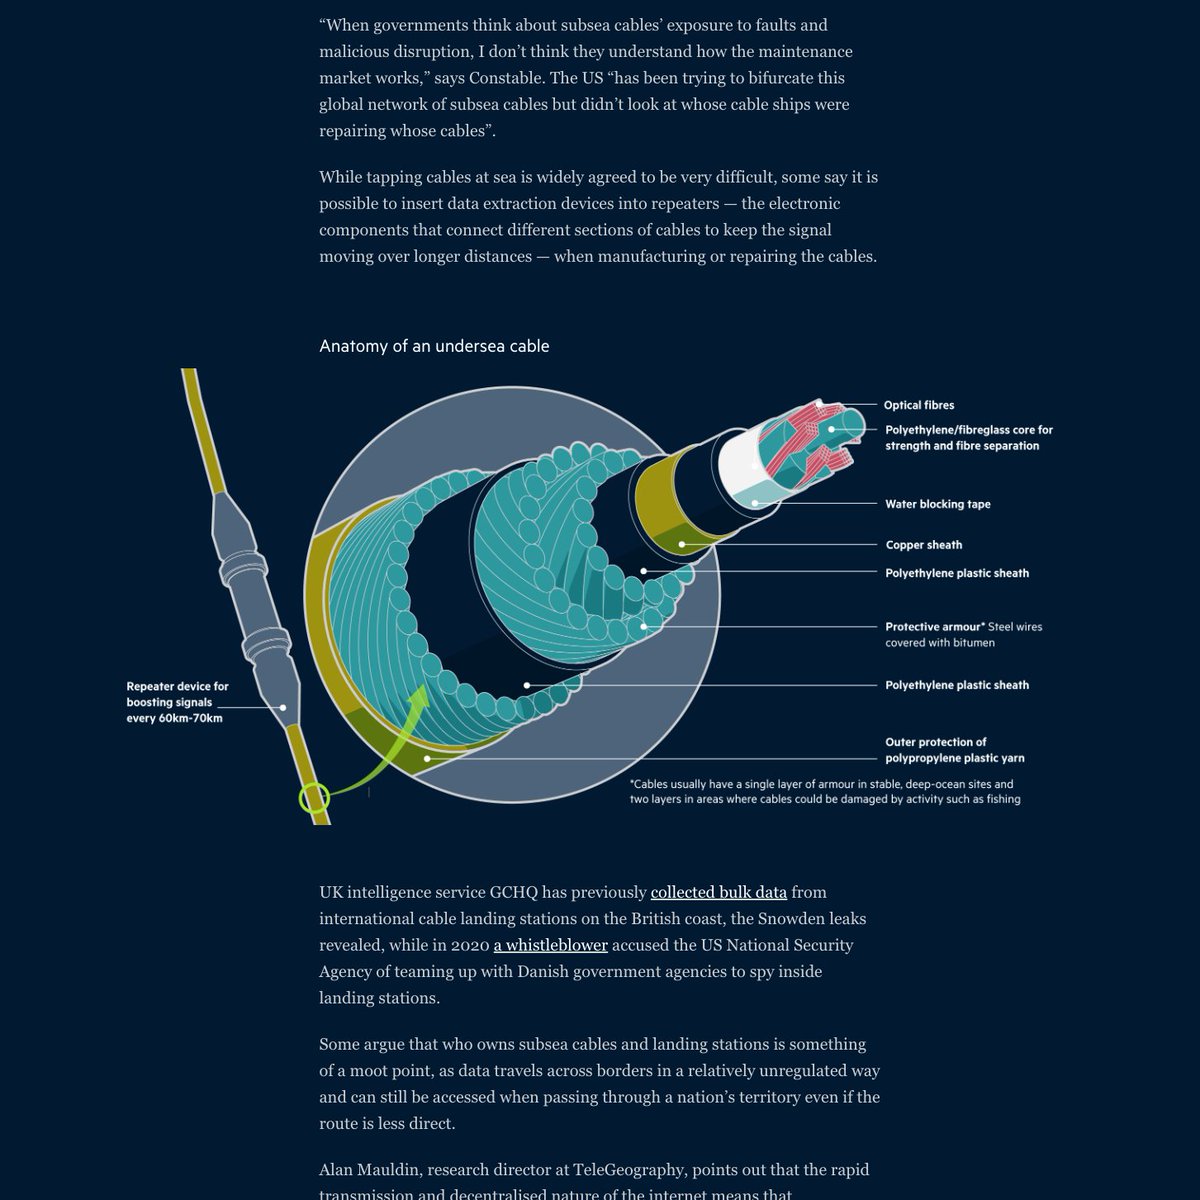 Had a great time working on this visual deep dive into the geopolitics of subsea internet cables. Richly reported + maps, charts, technical illustrations and mini globes!
ig.ft.com/subsea-cables/
#gistribe #dataviz